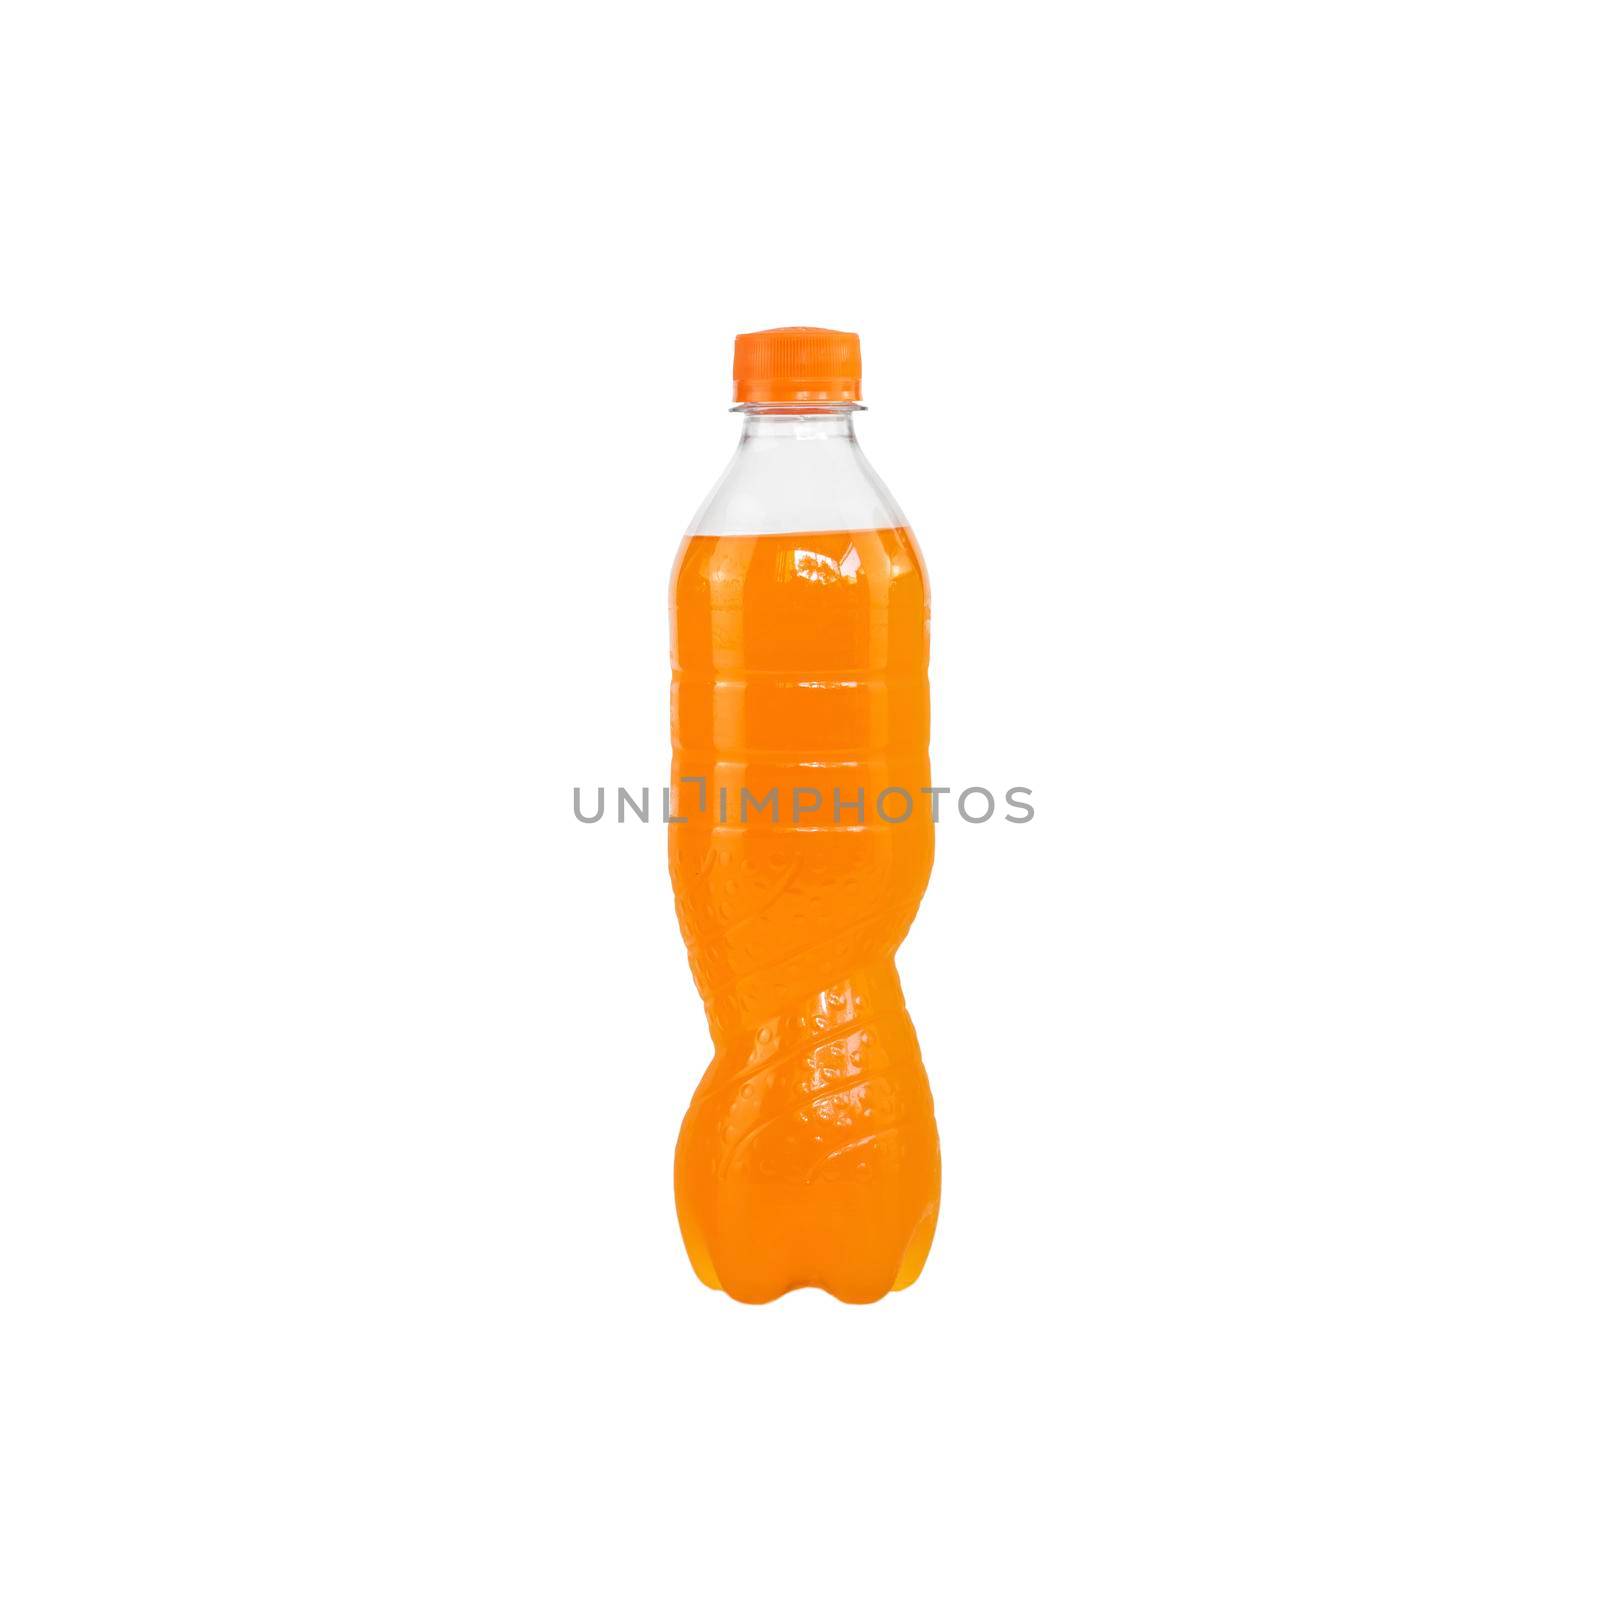 Orange sparkling water in a plastic bottle isolated on white background by wattanaphob